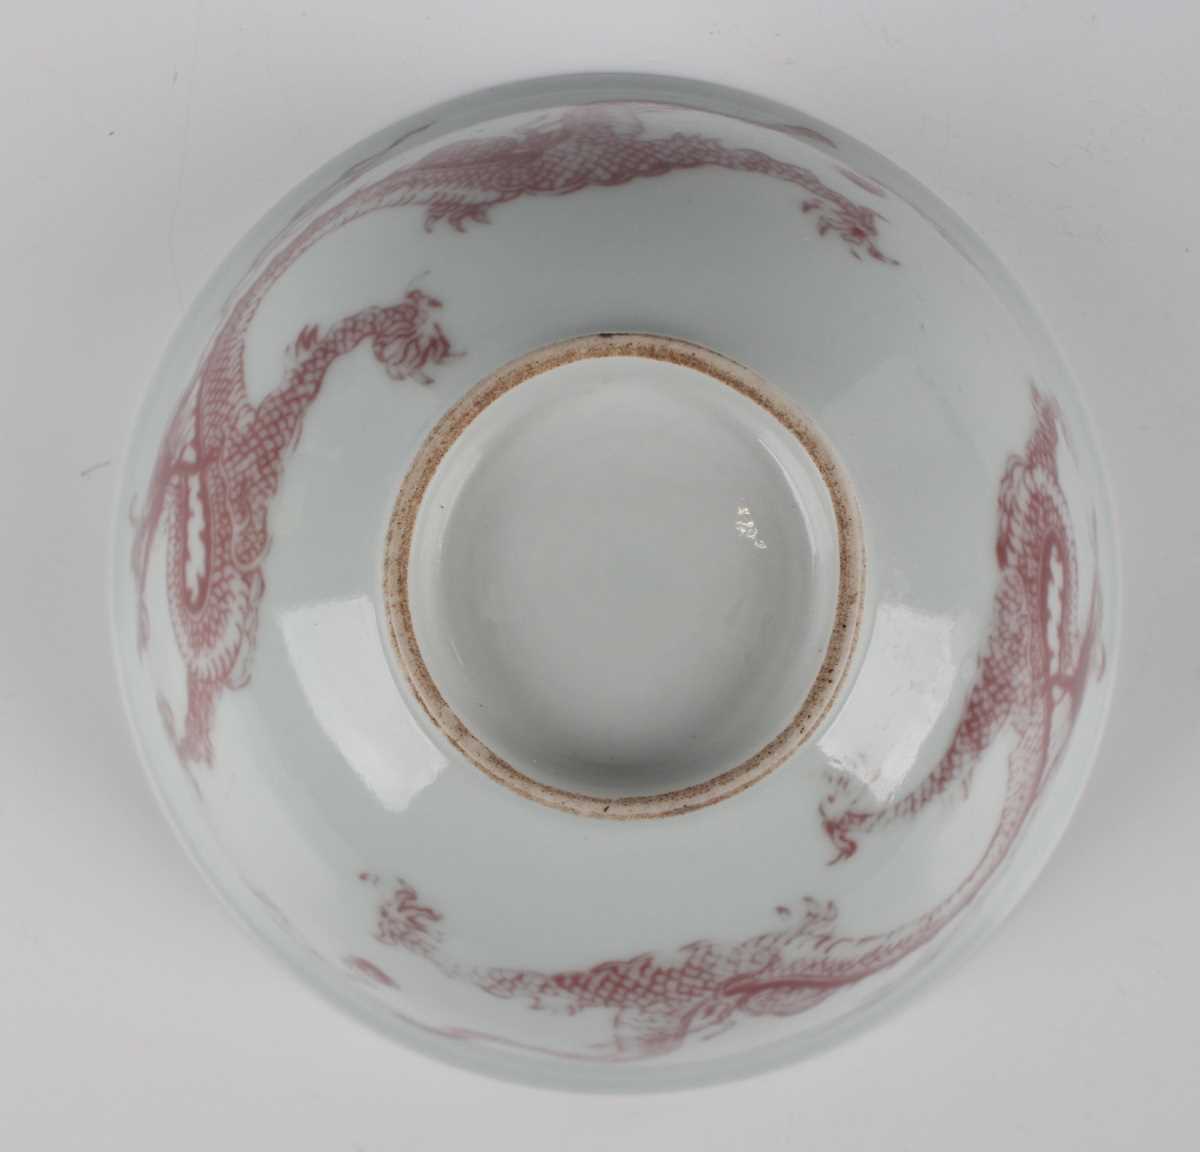 A Chinese underglaze red decorated porcelain bowl of steep-sided circular form, the exterior painted - Image 7 of 10